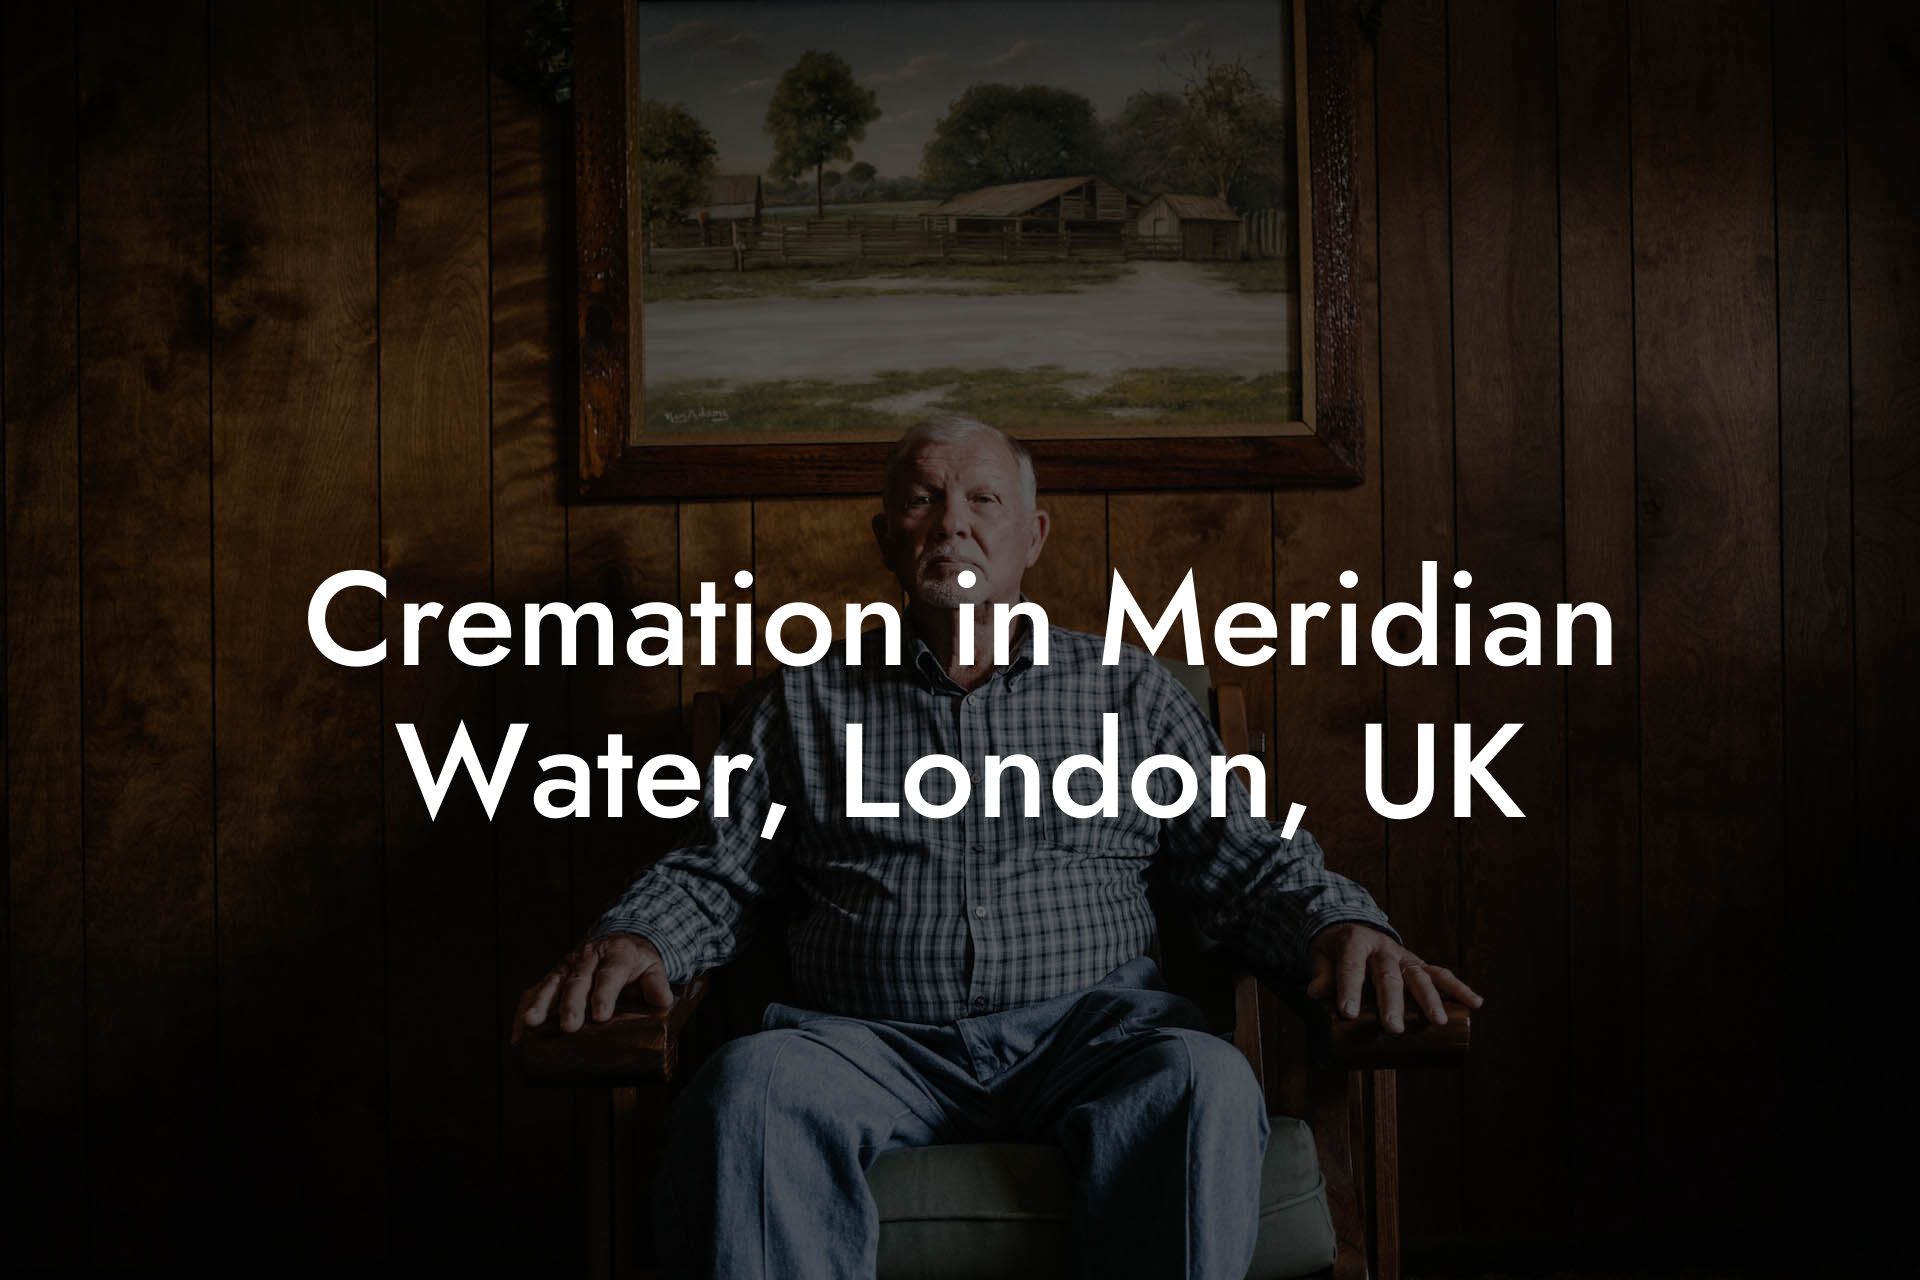 Cremation in Meridian Water, London, UK